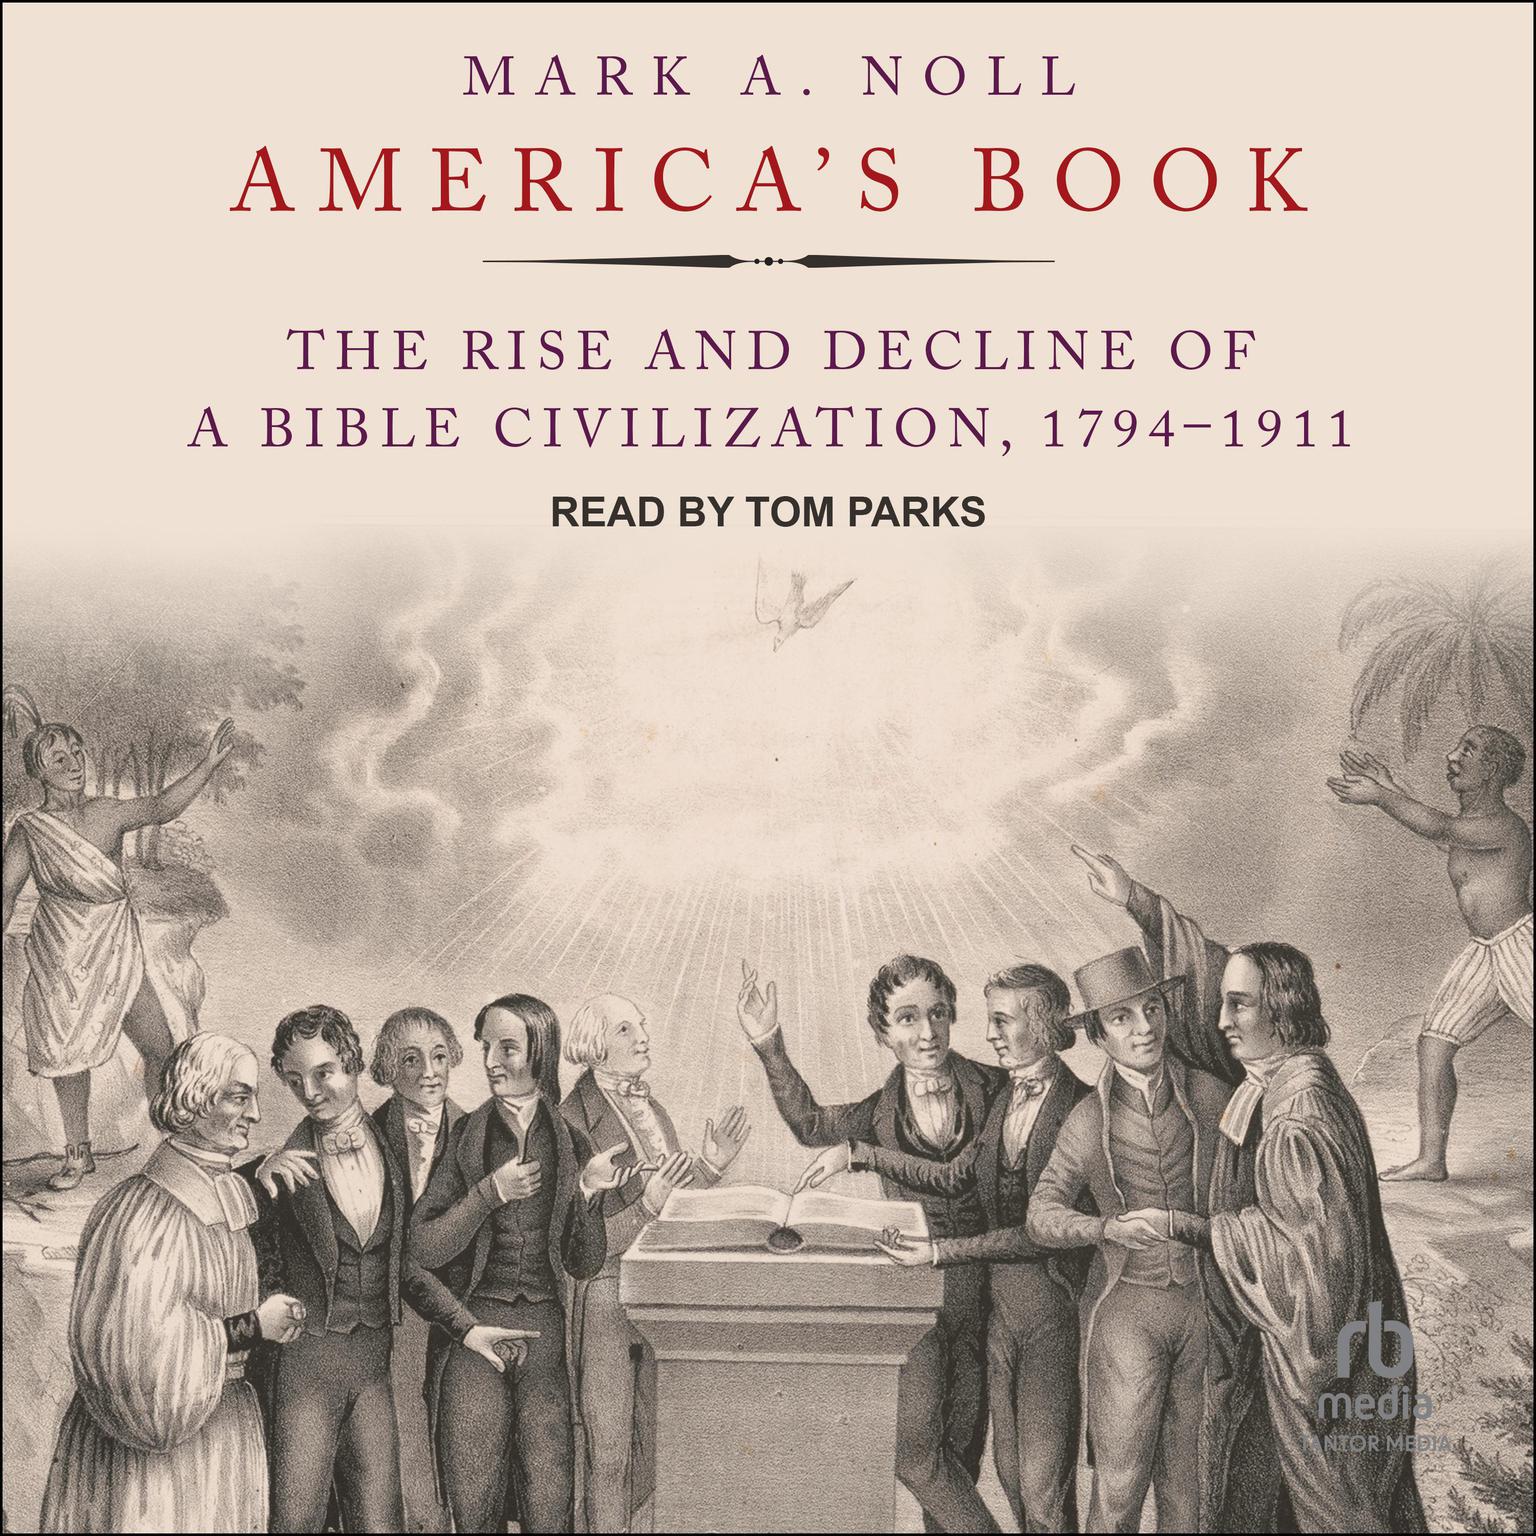 Americas Book: The Rise and Decline of a Bible Civilization, 1794-1911 Audiobook, by Mark A. Noll